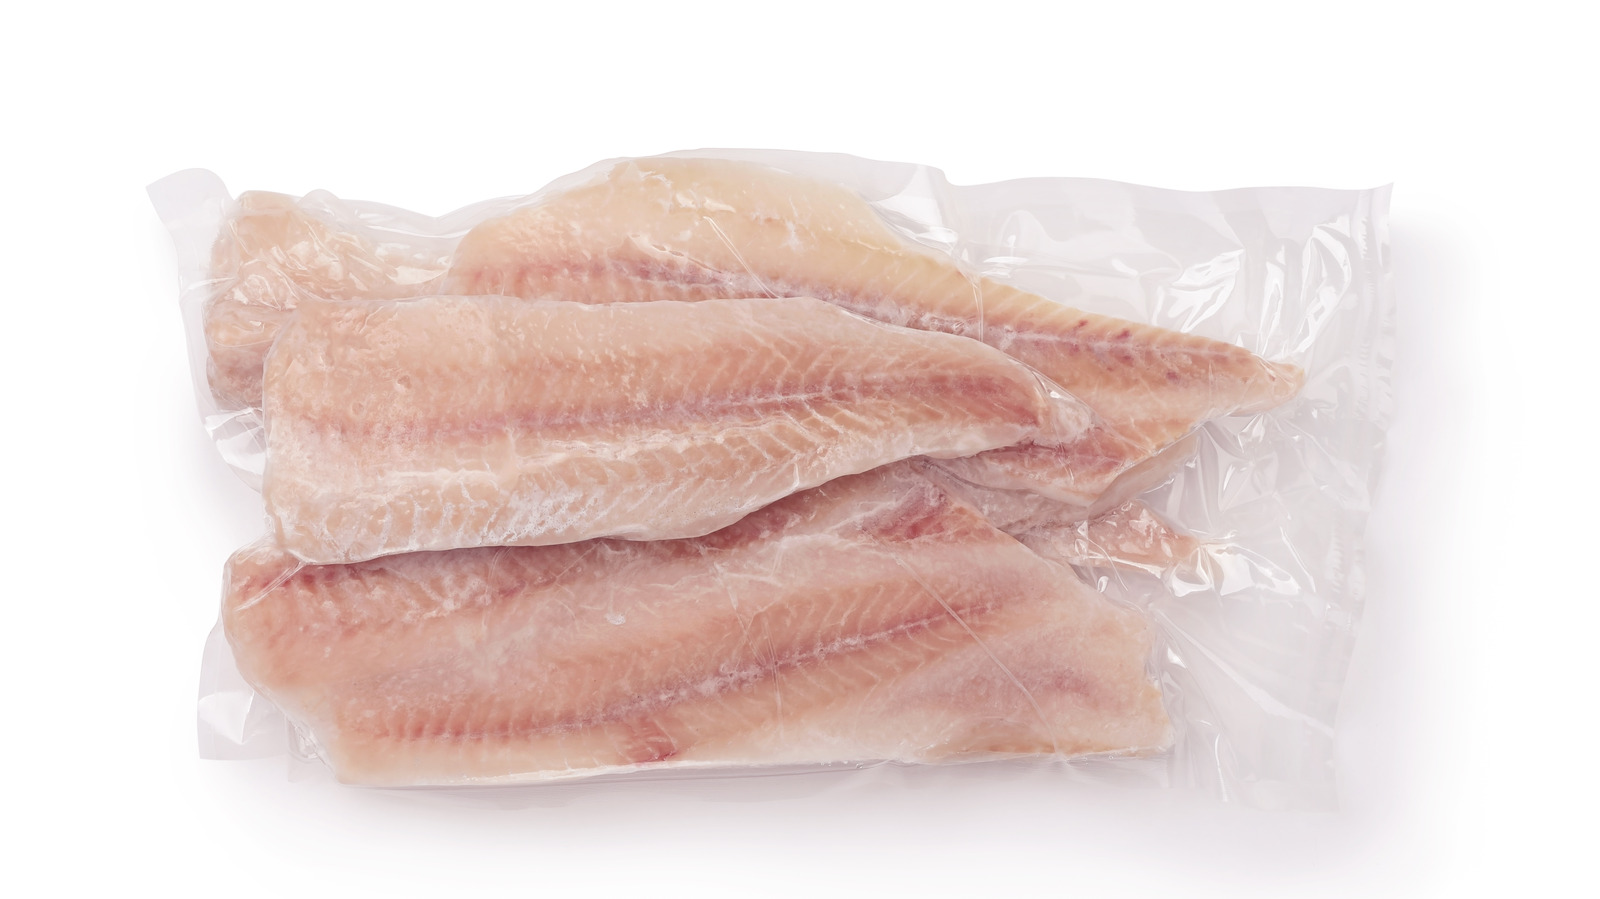 Throw Your Packaged Frozen Fish Away Immediately If You Notice This